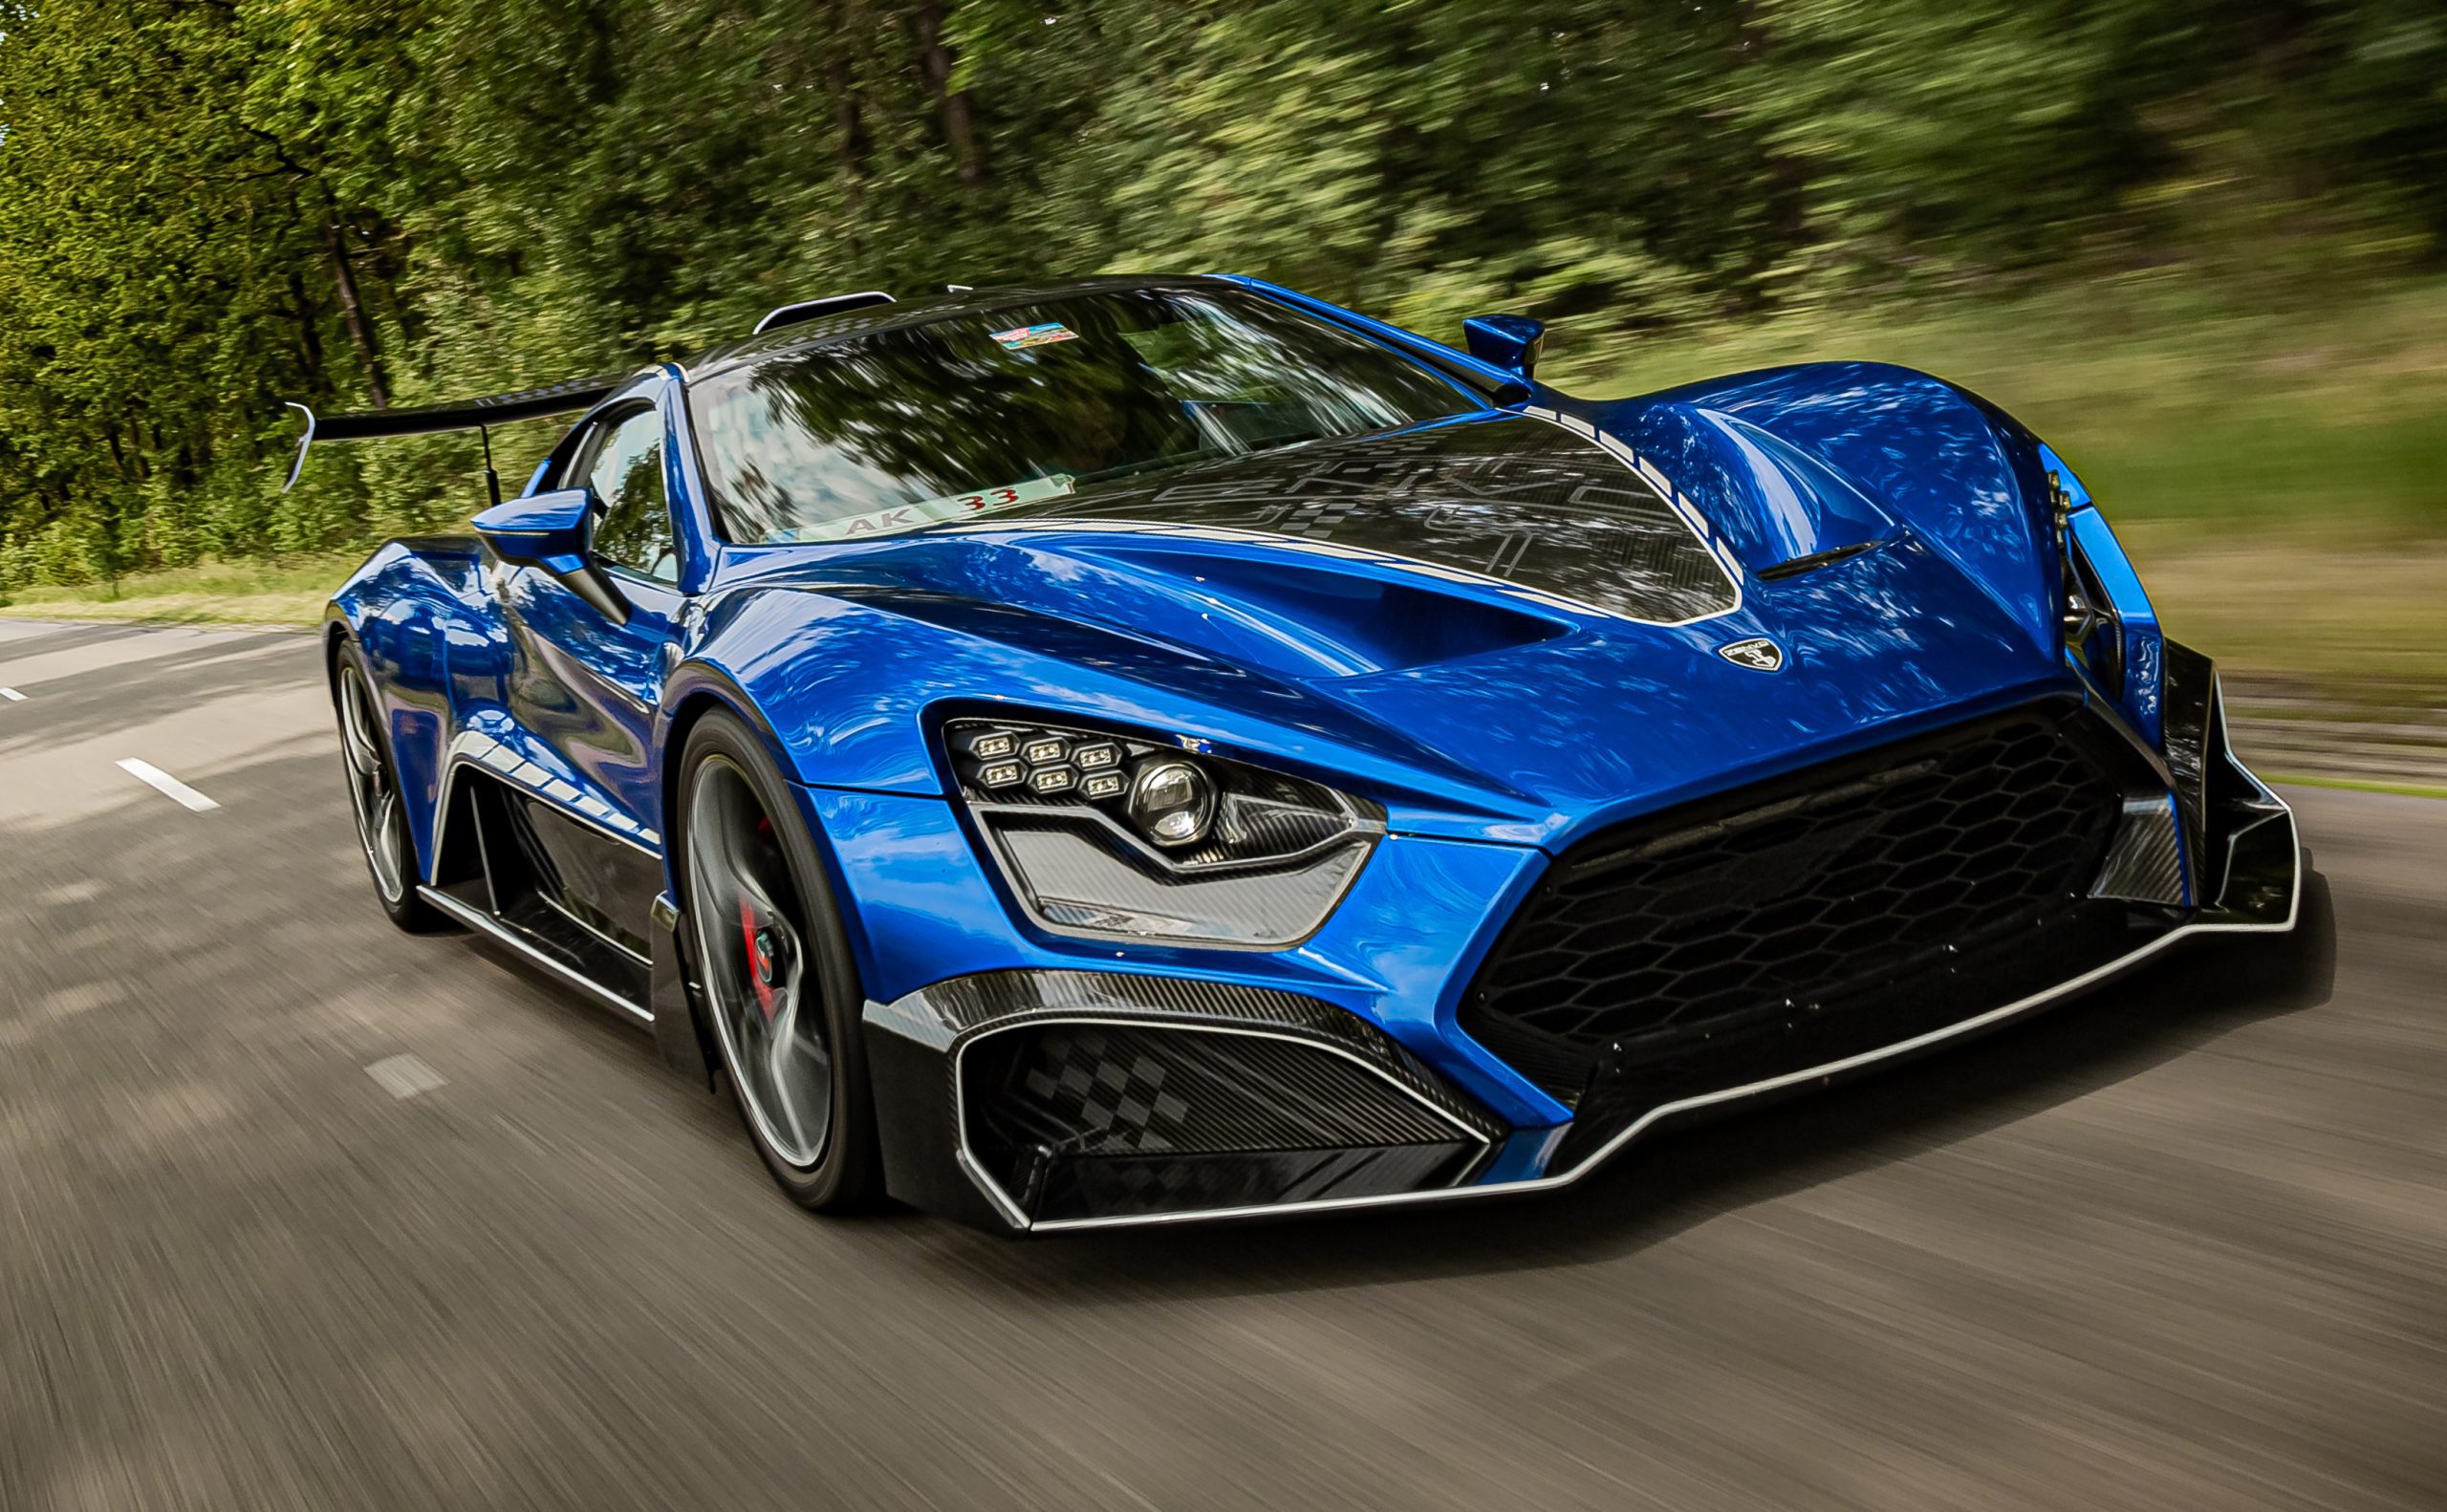 VP Racing Fuels Announces Factory-Fill Agreement With Zenvo Automotive